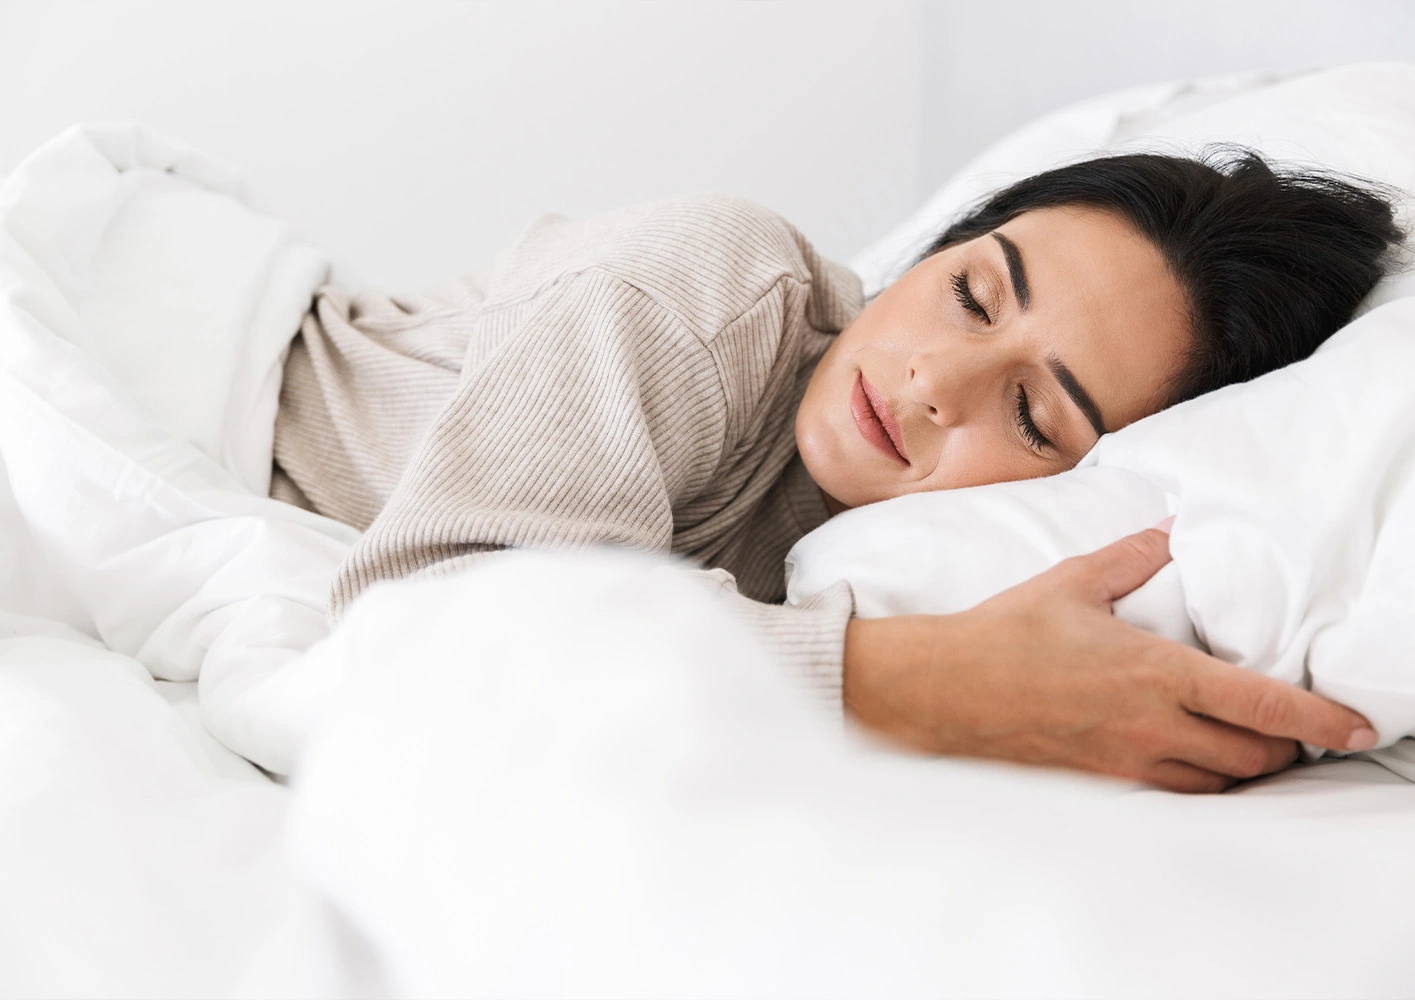 Dr Zoe’s tips for a better night’s sleep